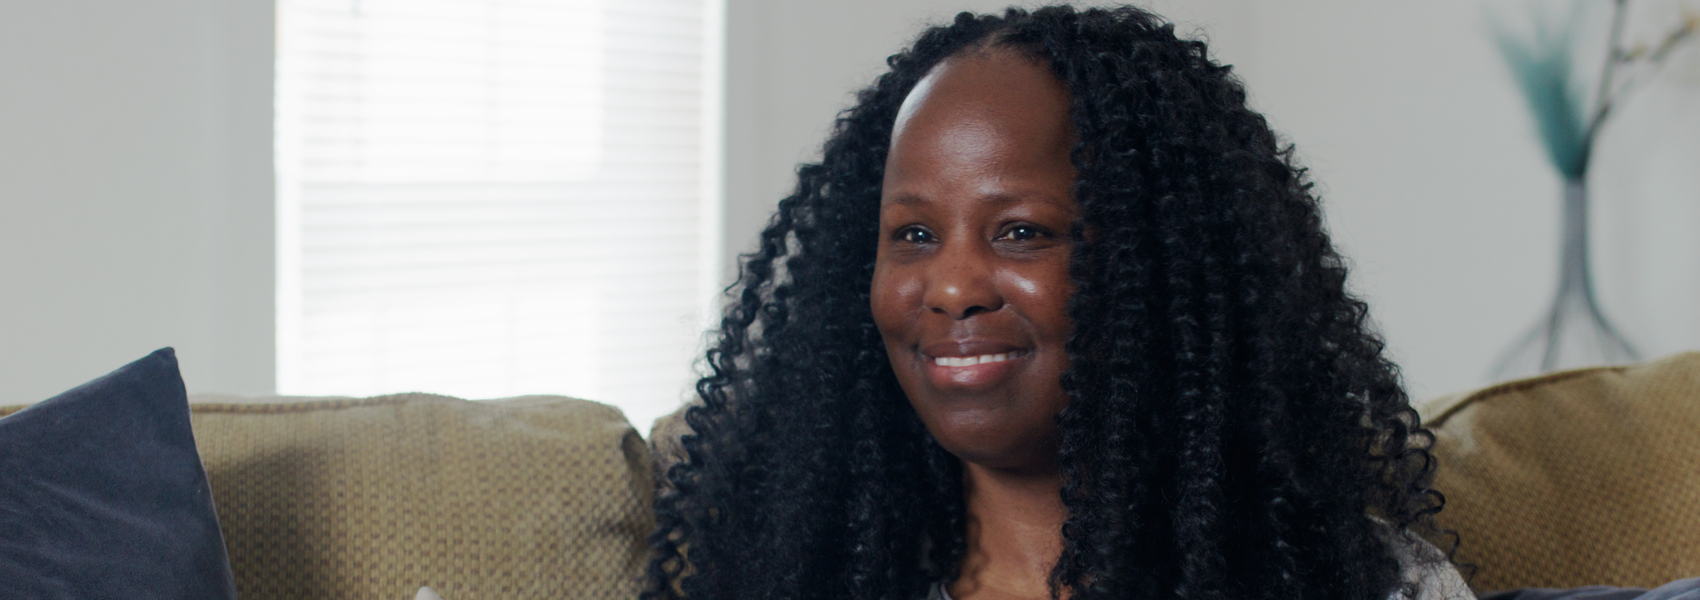 Black woman landlord smiles on couch